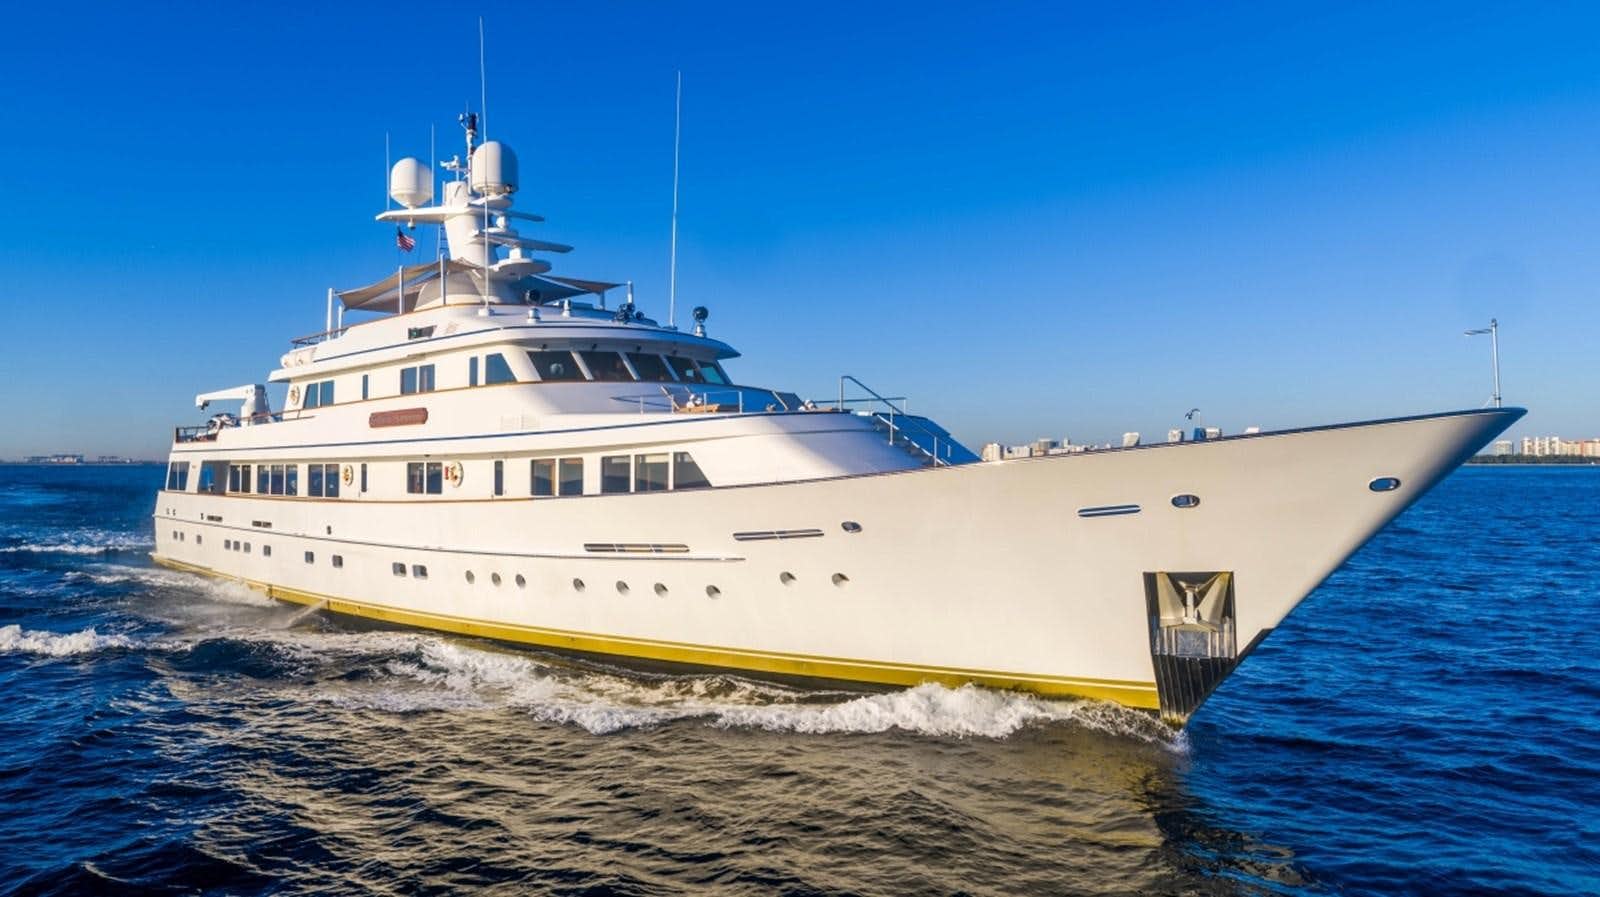 ENDLESS SUMMER Yacht for Sale in United States, 156' (47.54m) 1991 FEADSHIP